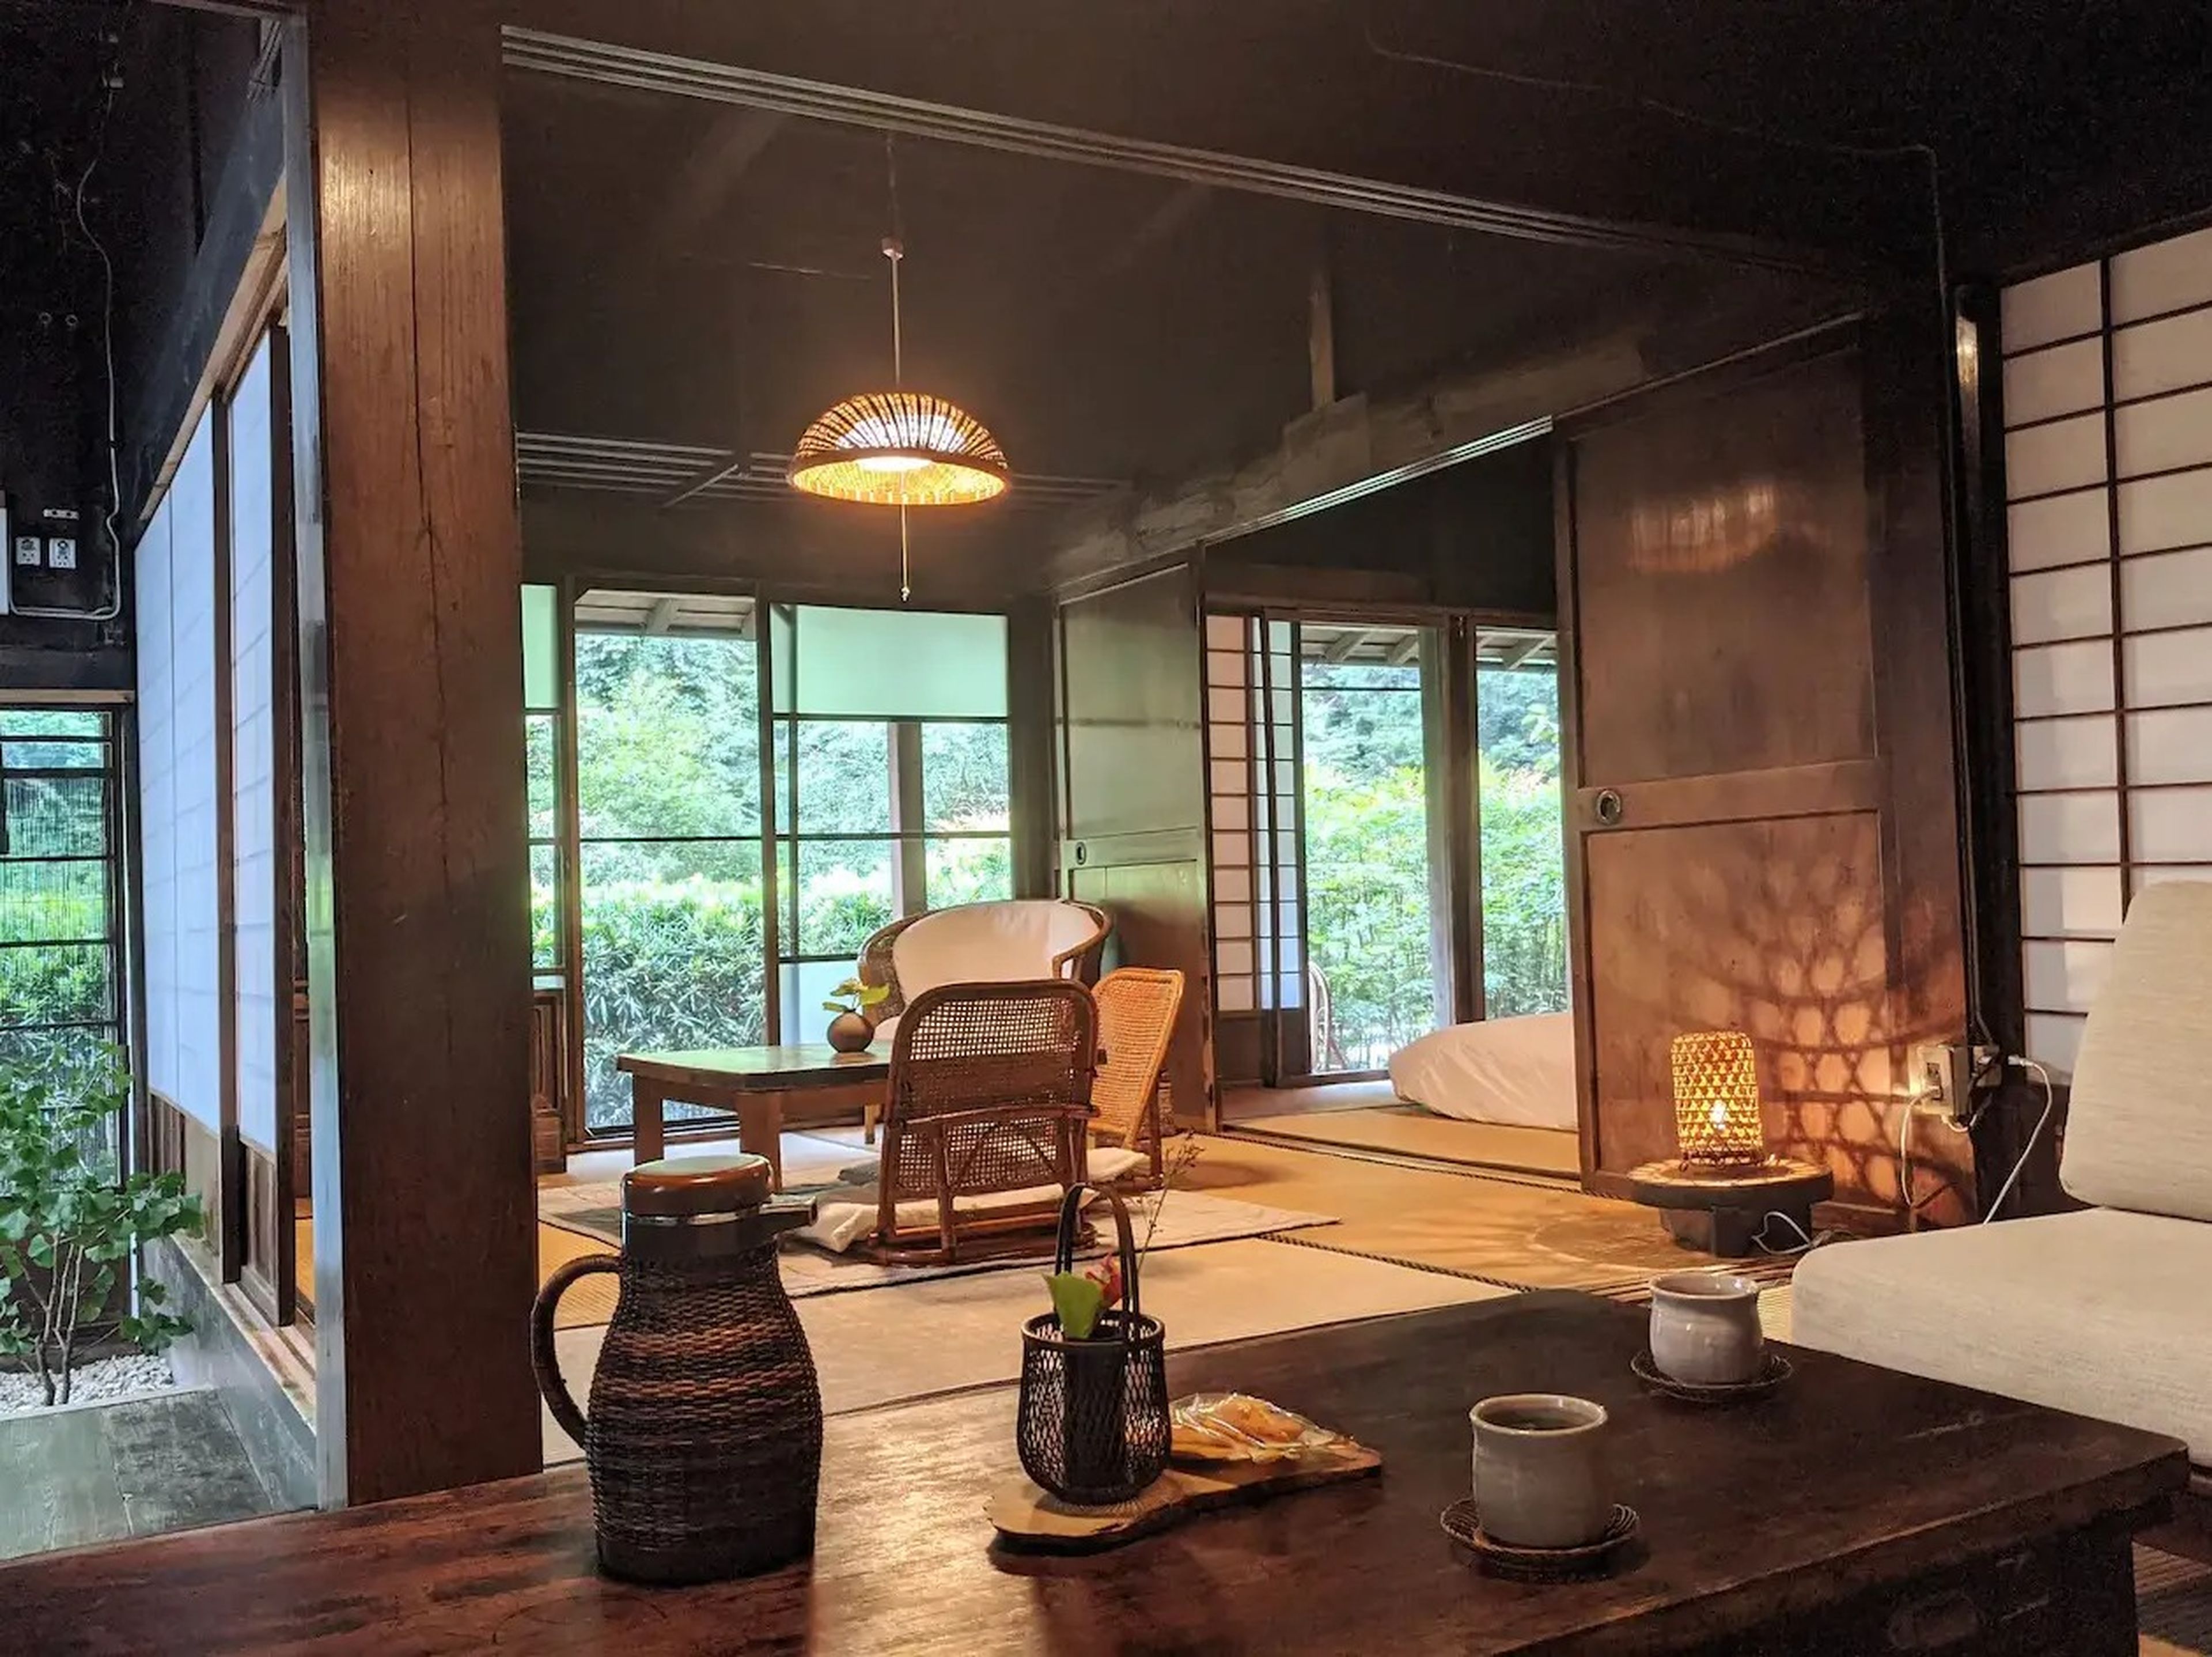 The living area of the ryokan after it was restored.